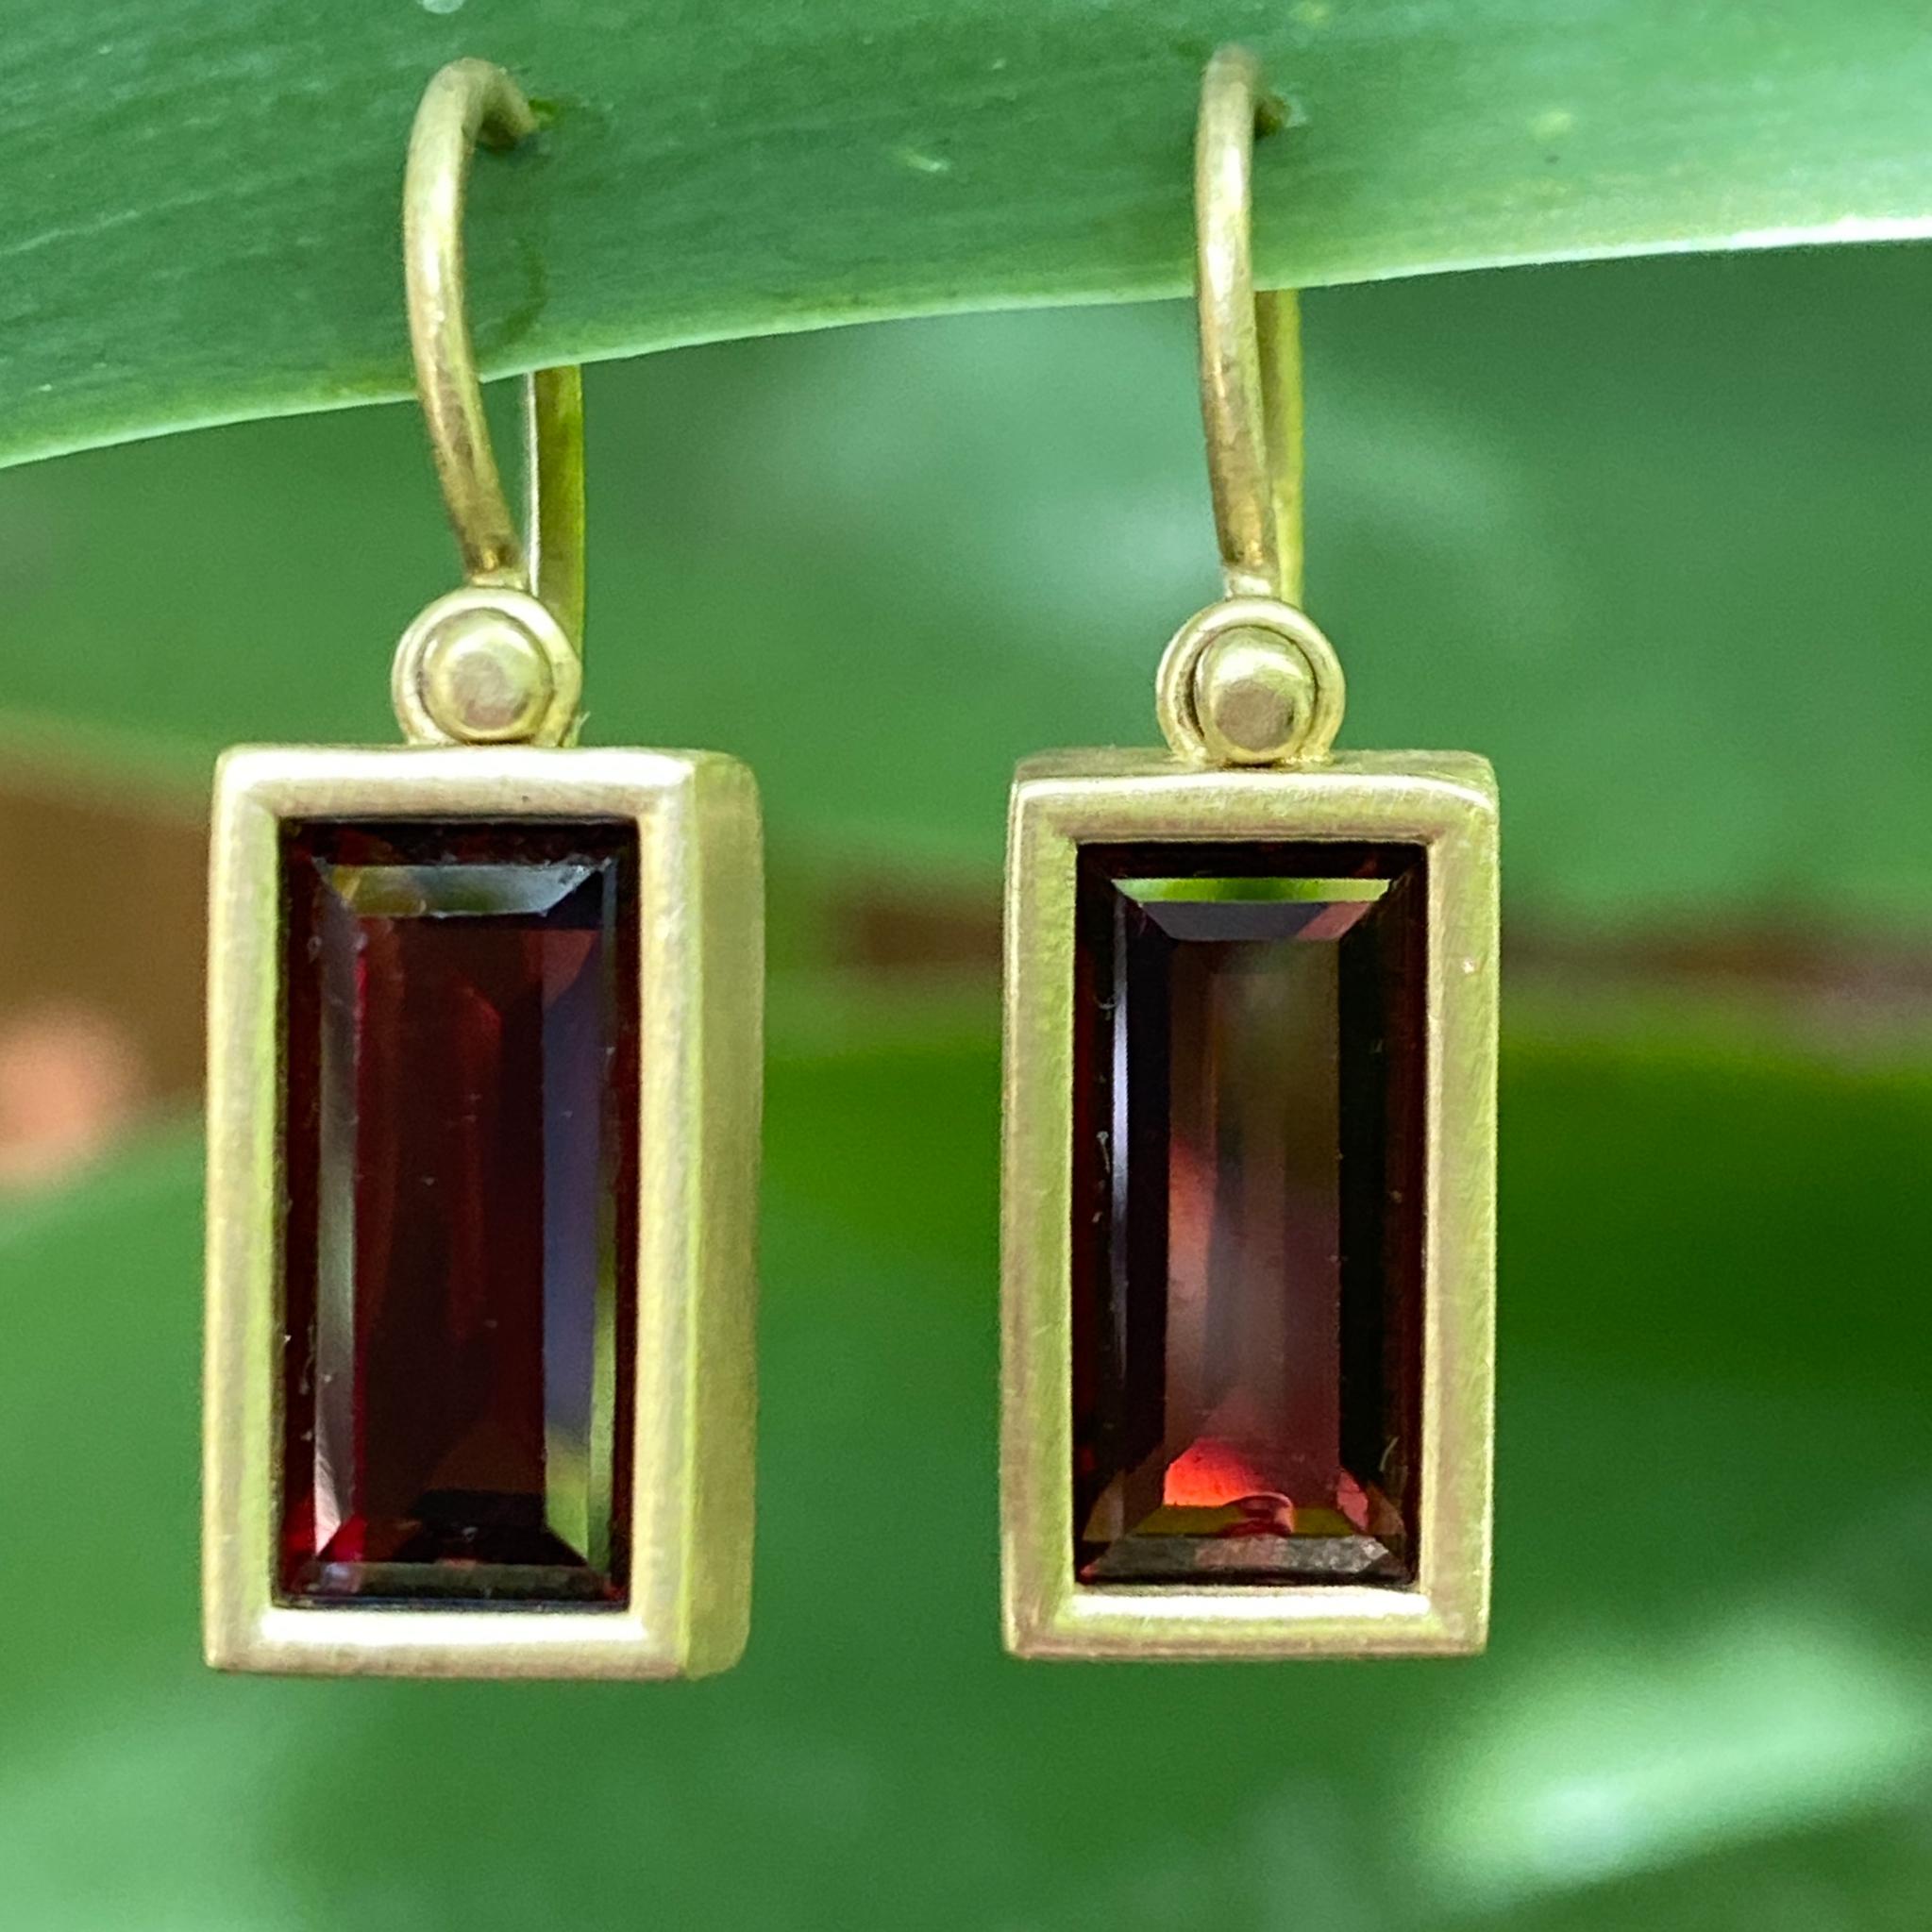 These clean, graphic earrings by Eytan Brandes feature a pair of red garnets in satiny 18 karat yellow boxes on simple wire hooks.

The Zambian garnets are clean step-cut rectangles measuring 12mm x 6mm and weighing 2.9 carats each.  They are